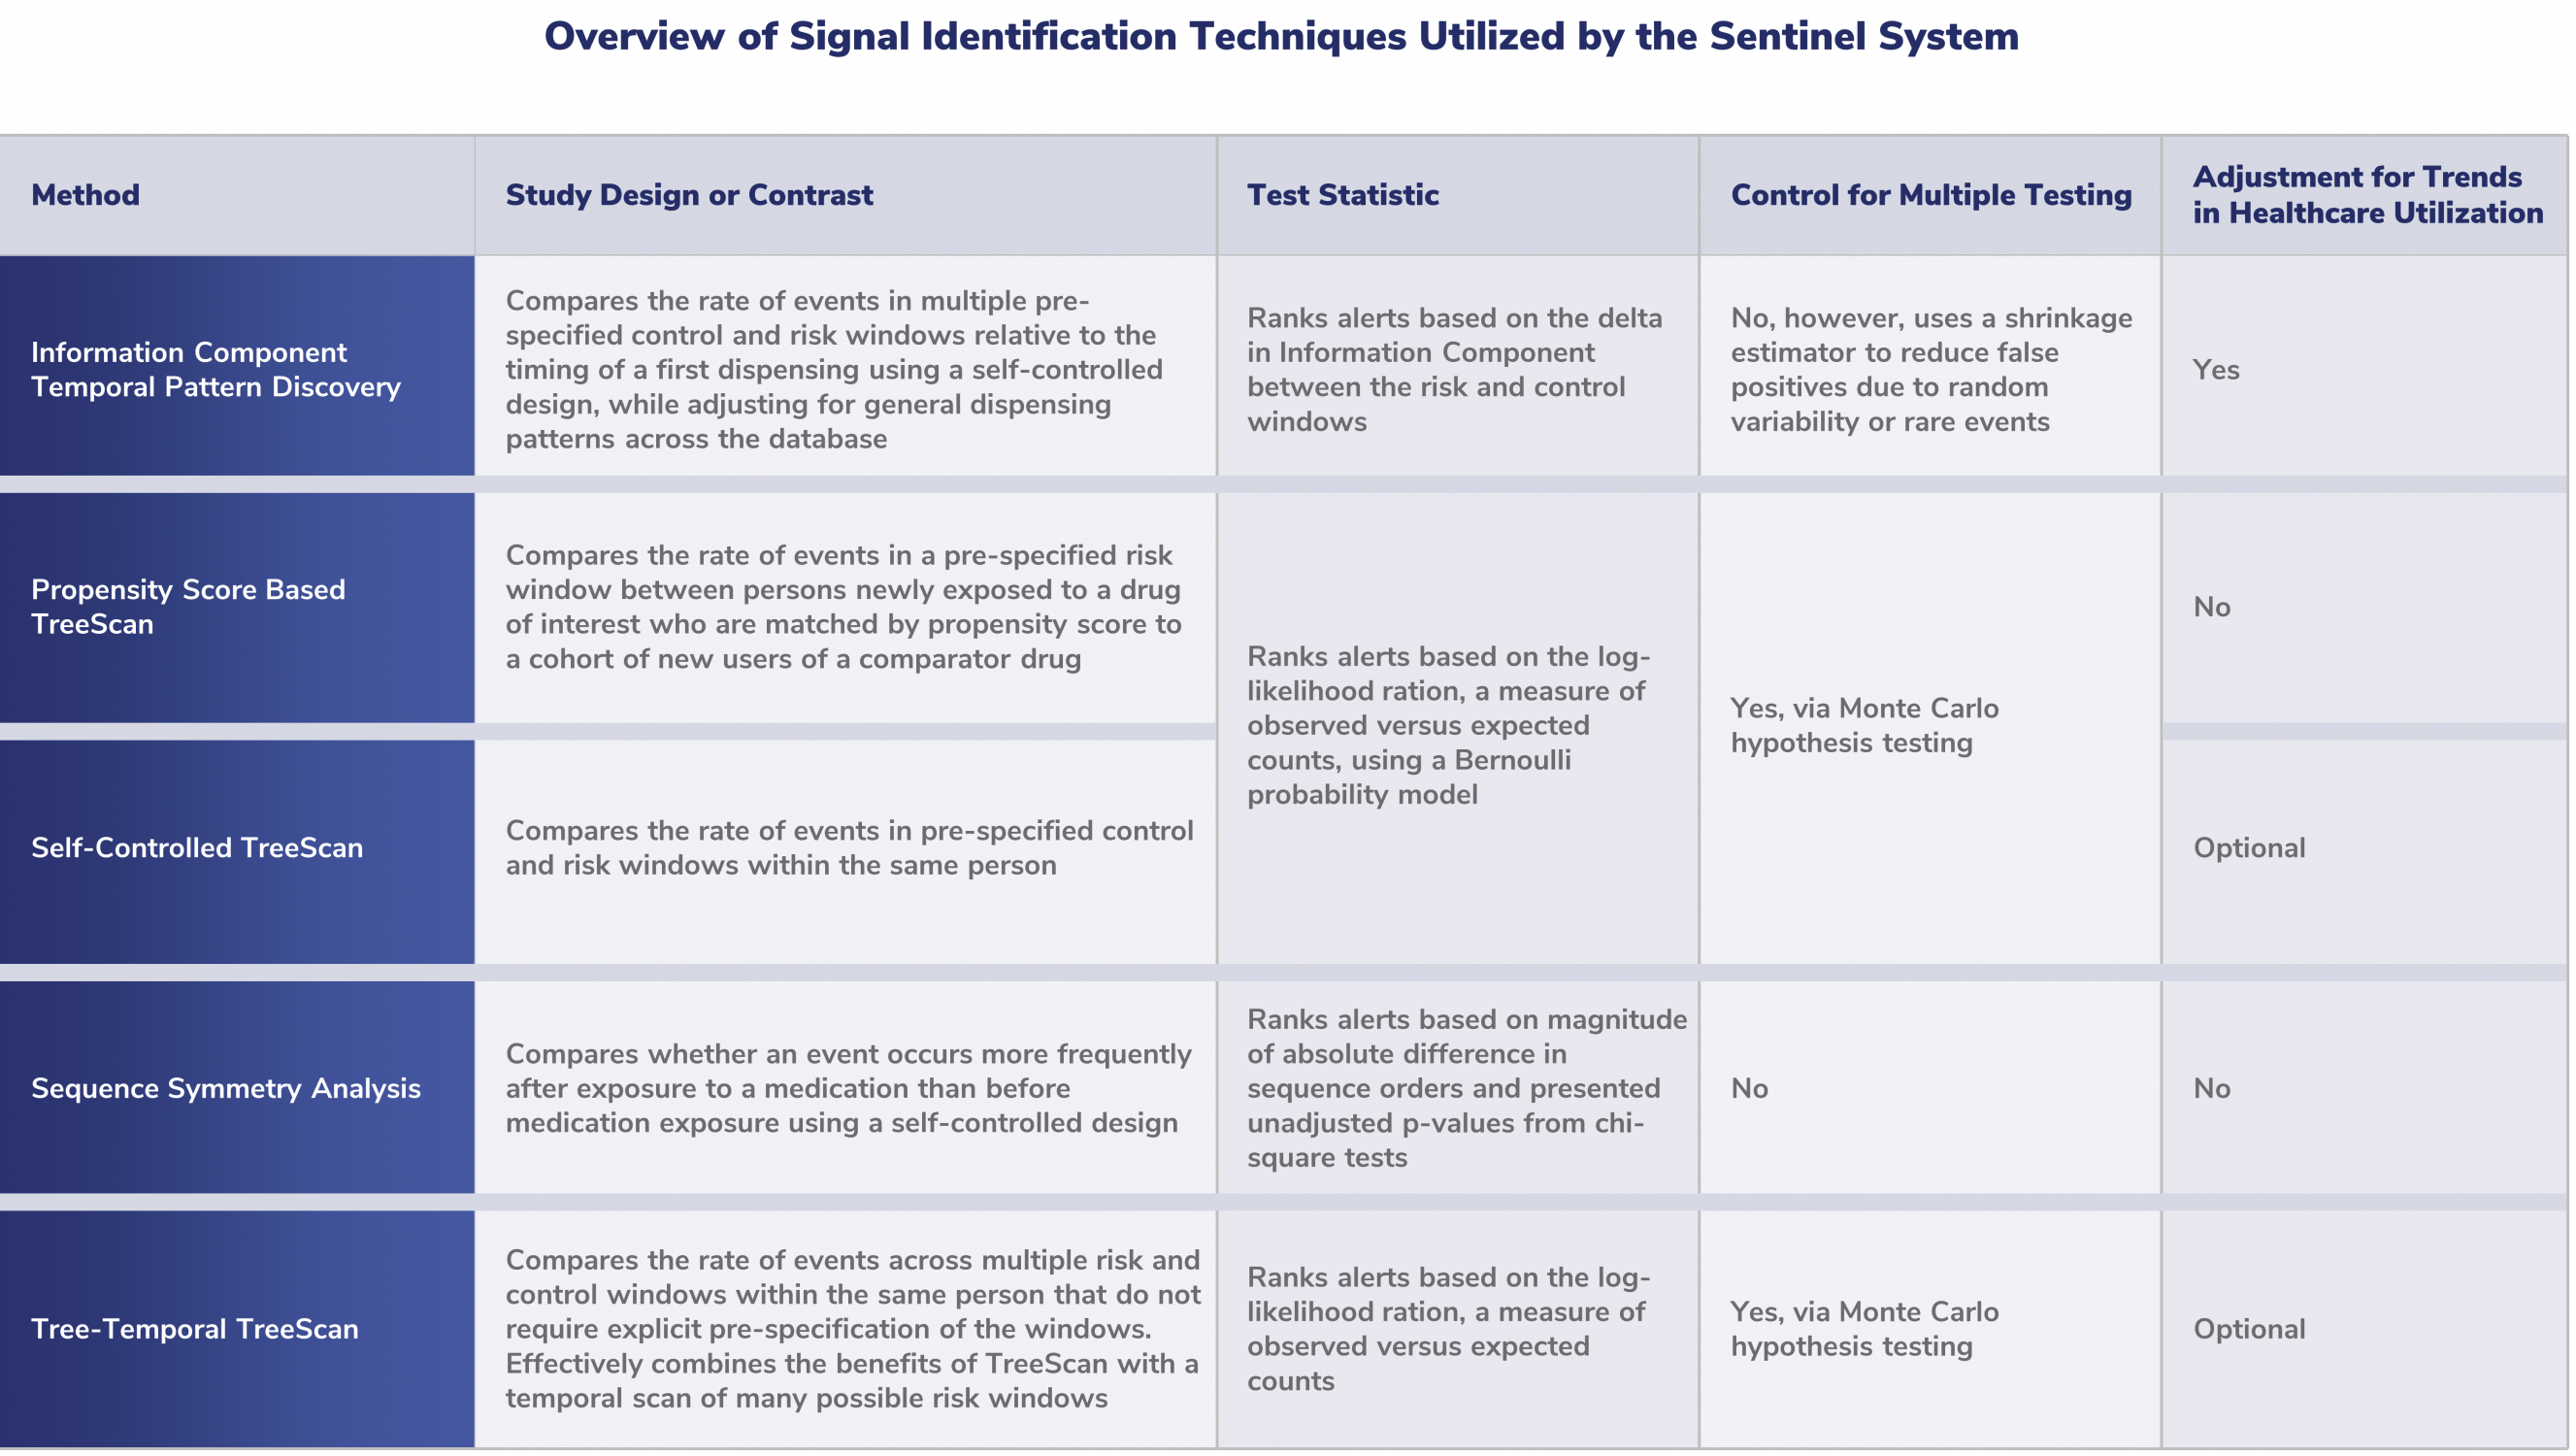 Overview of Signal Identification Techniques